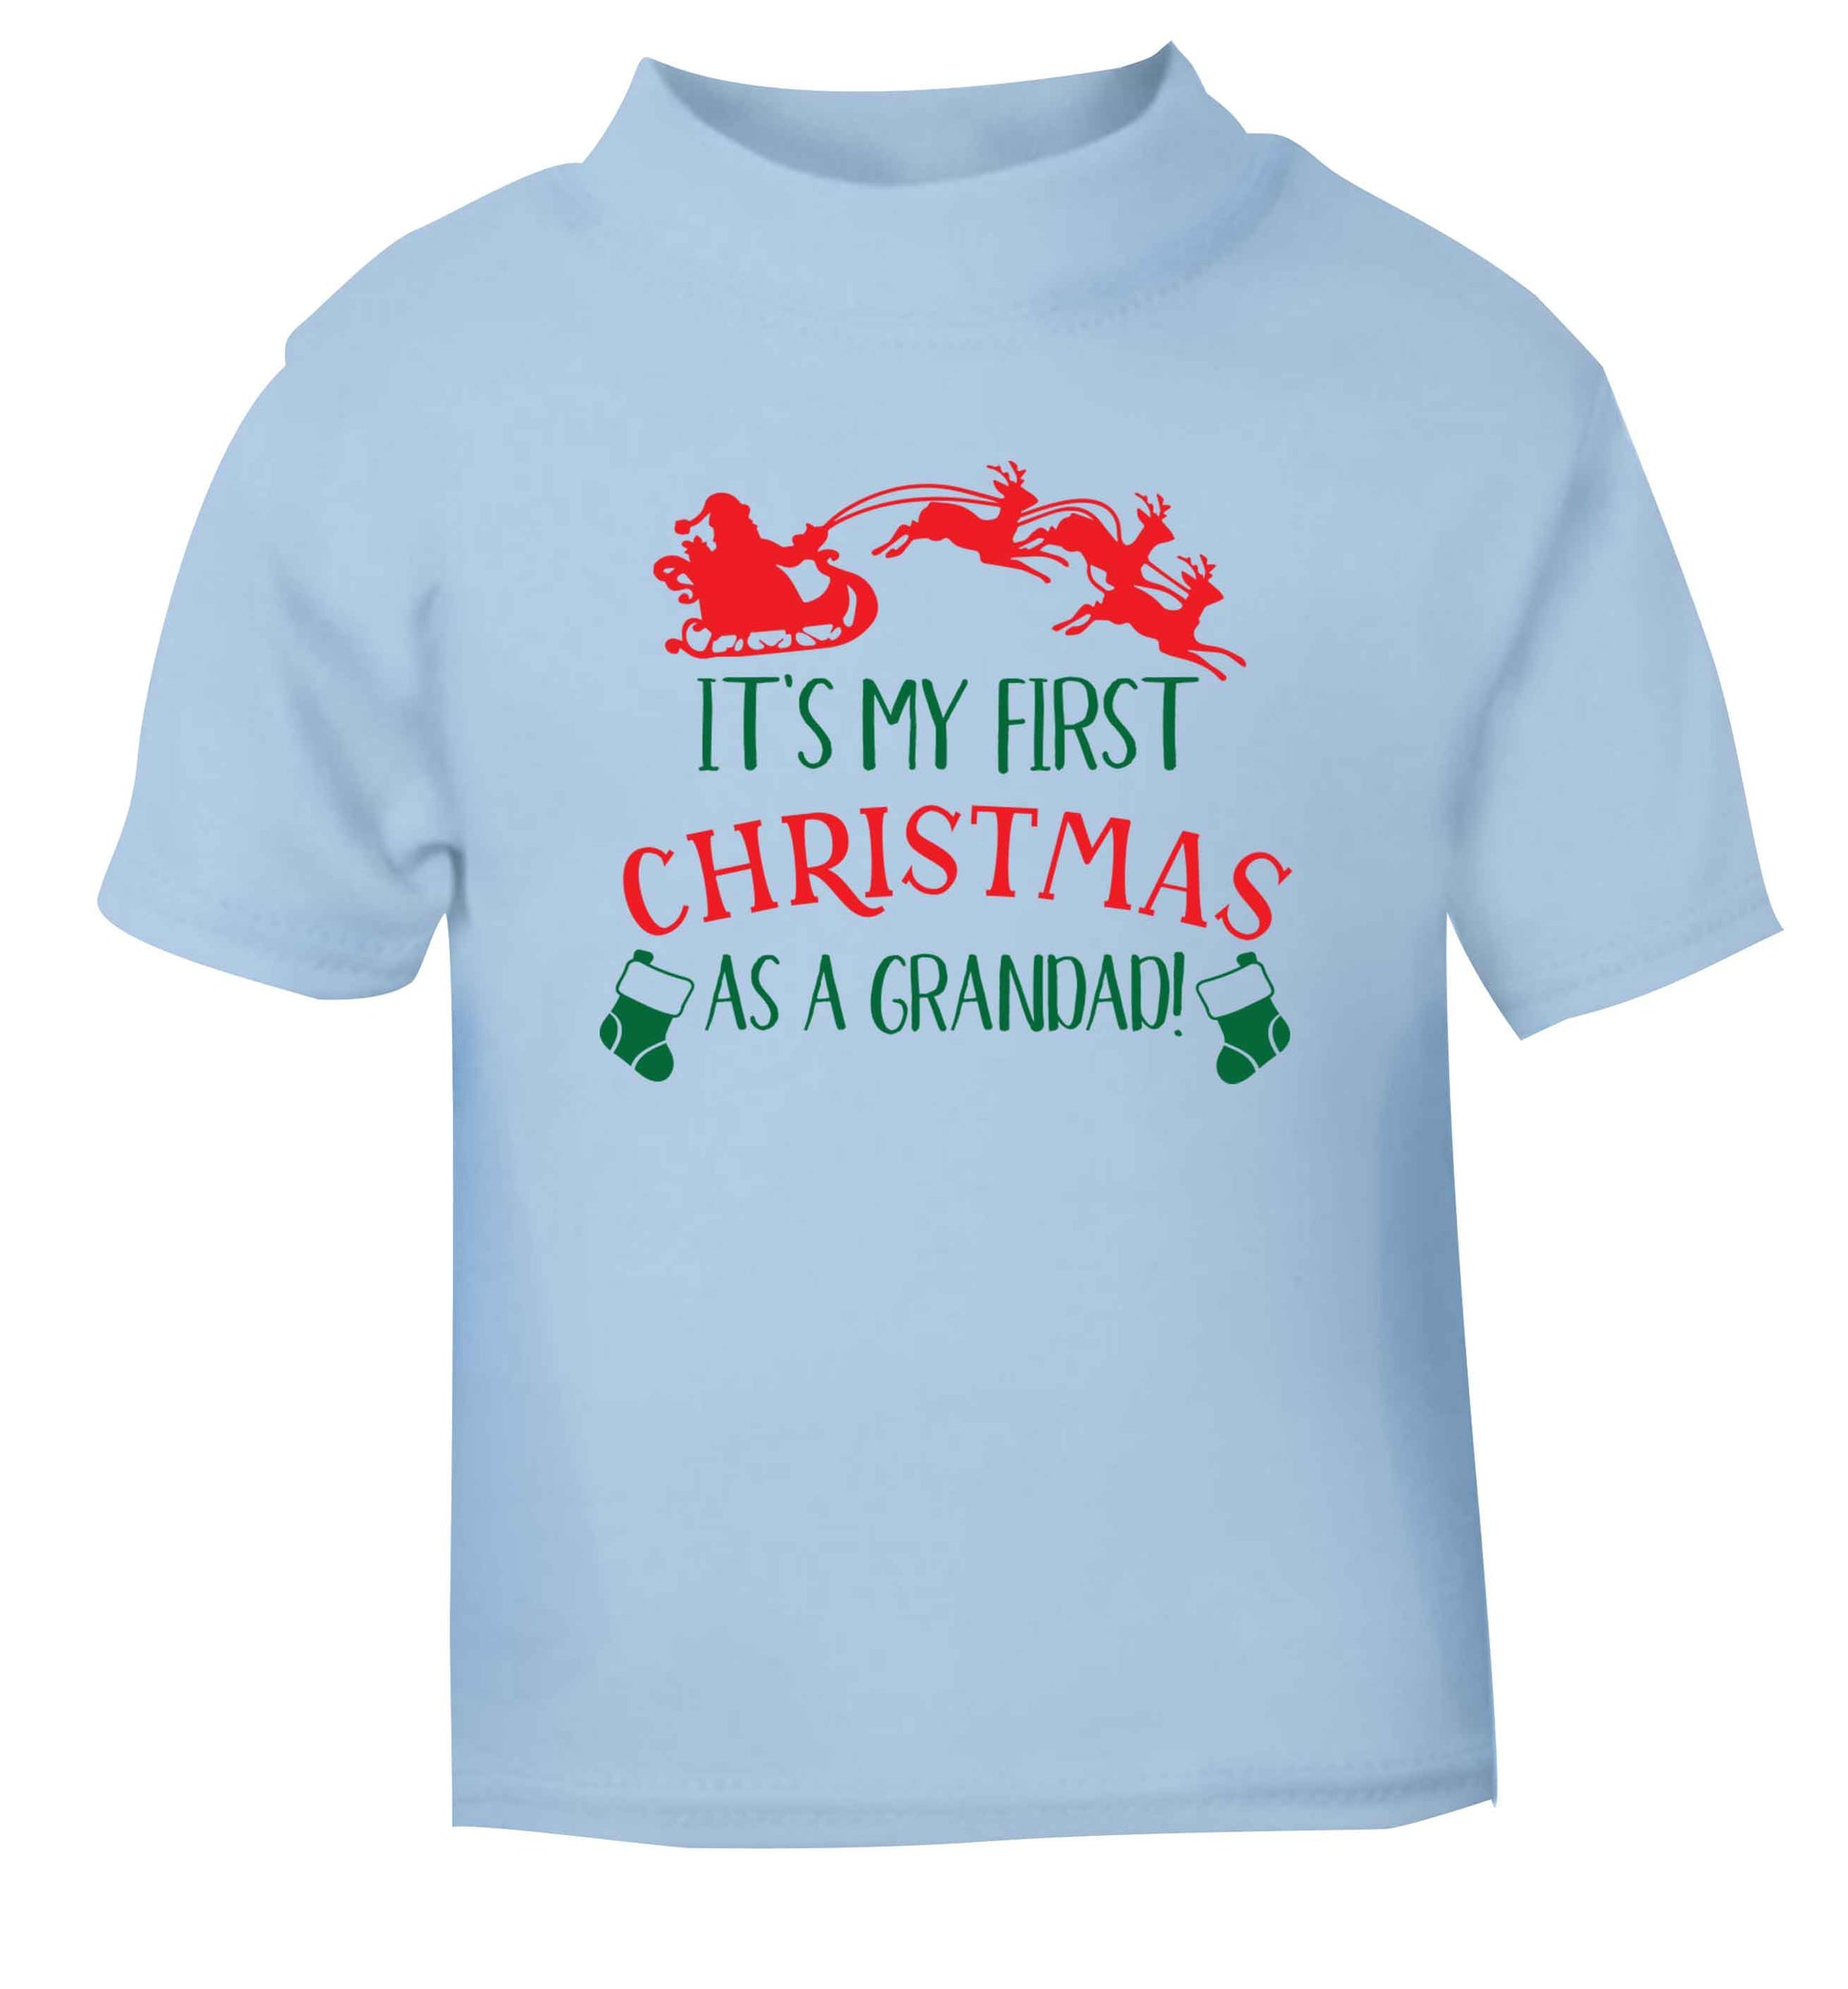 It's my first Christmas as a grandad! light blue Baby Toddler Tshirt 2 Years